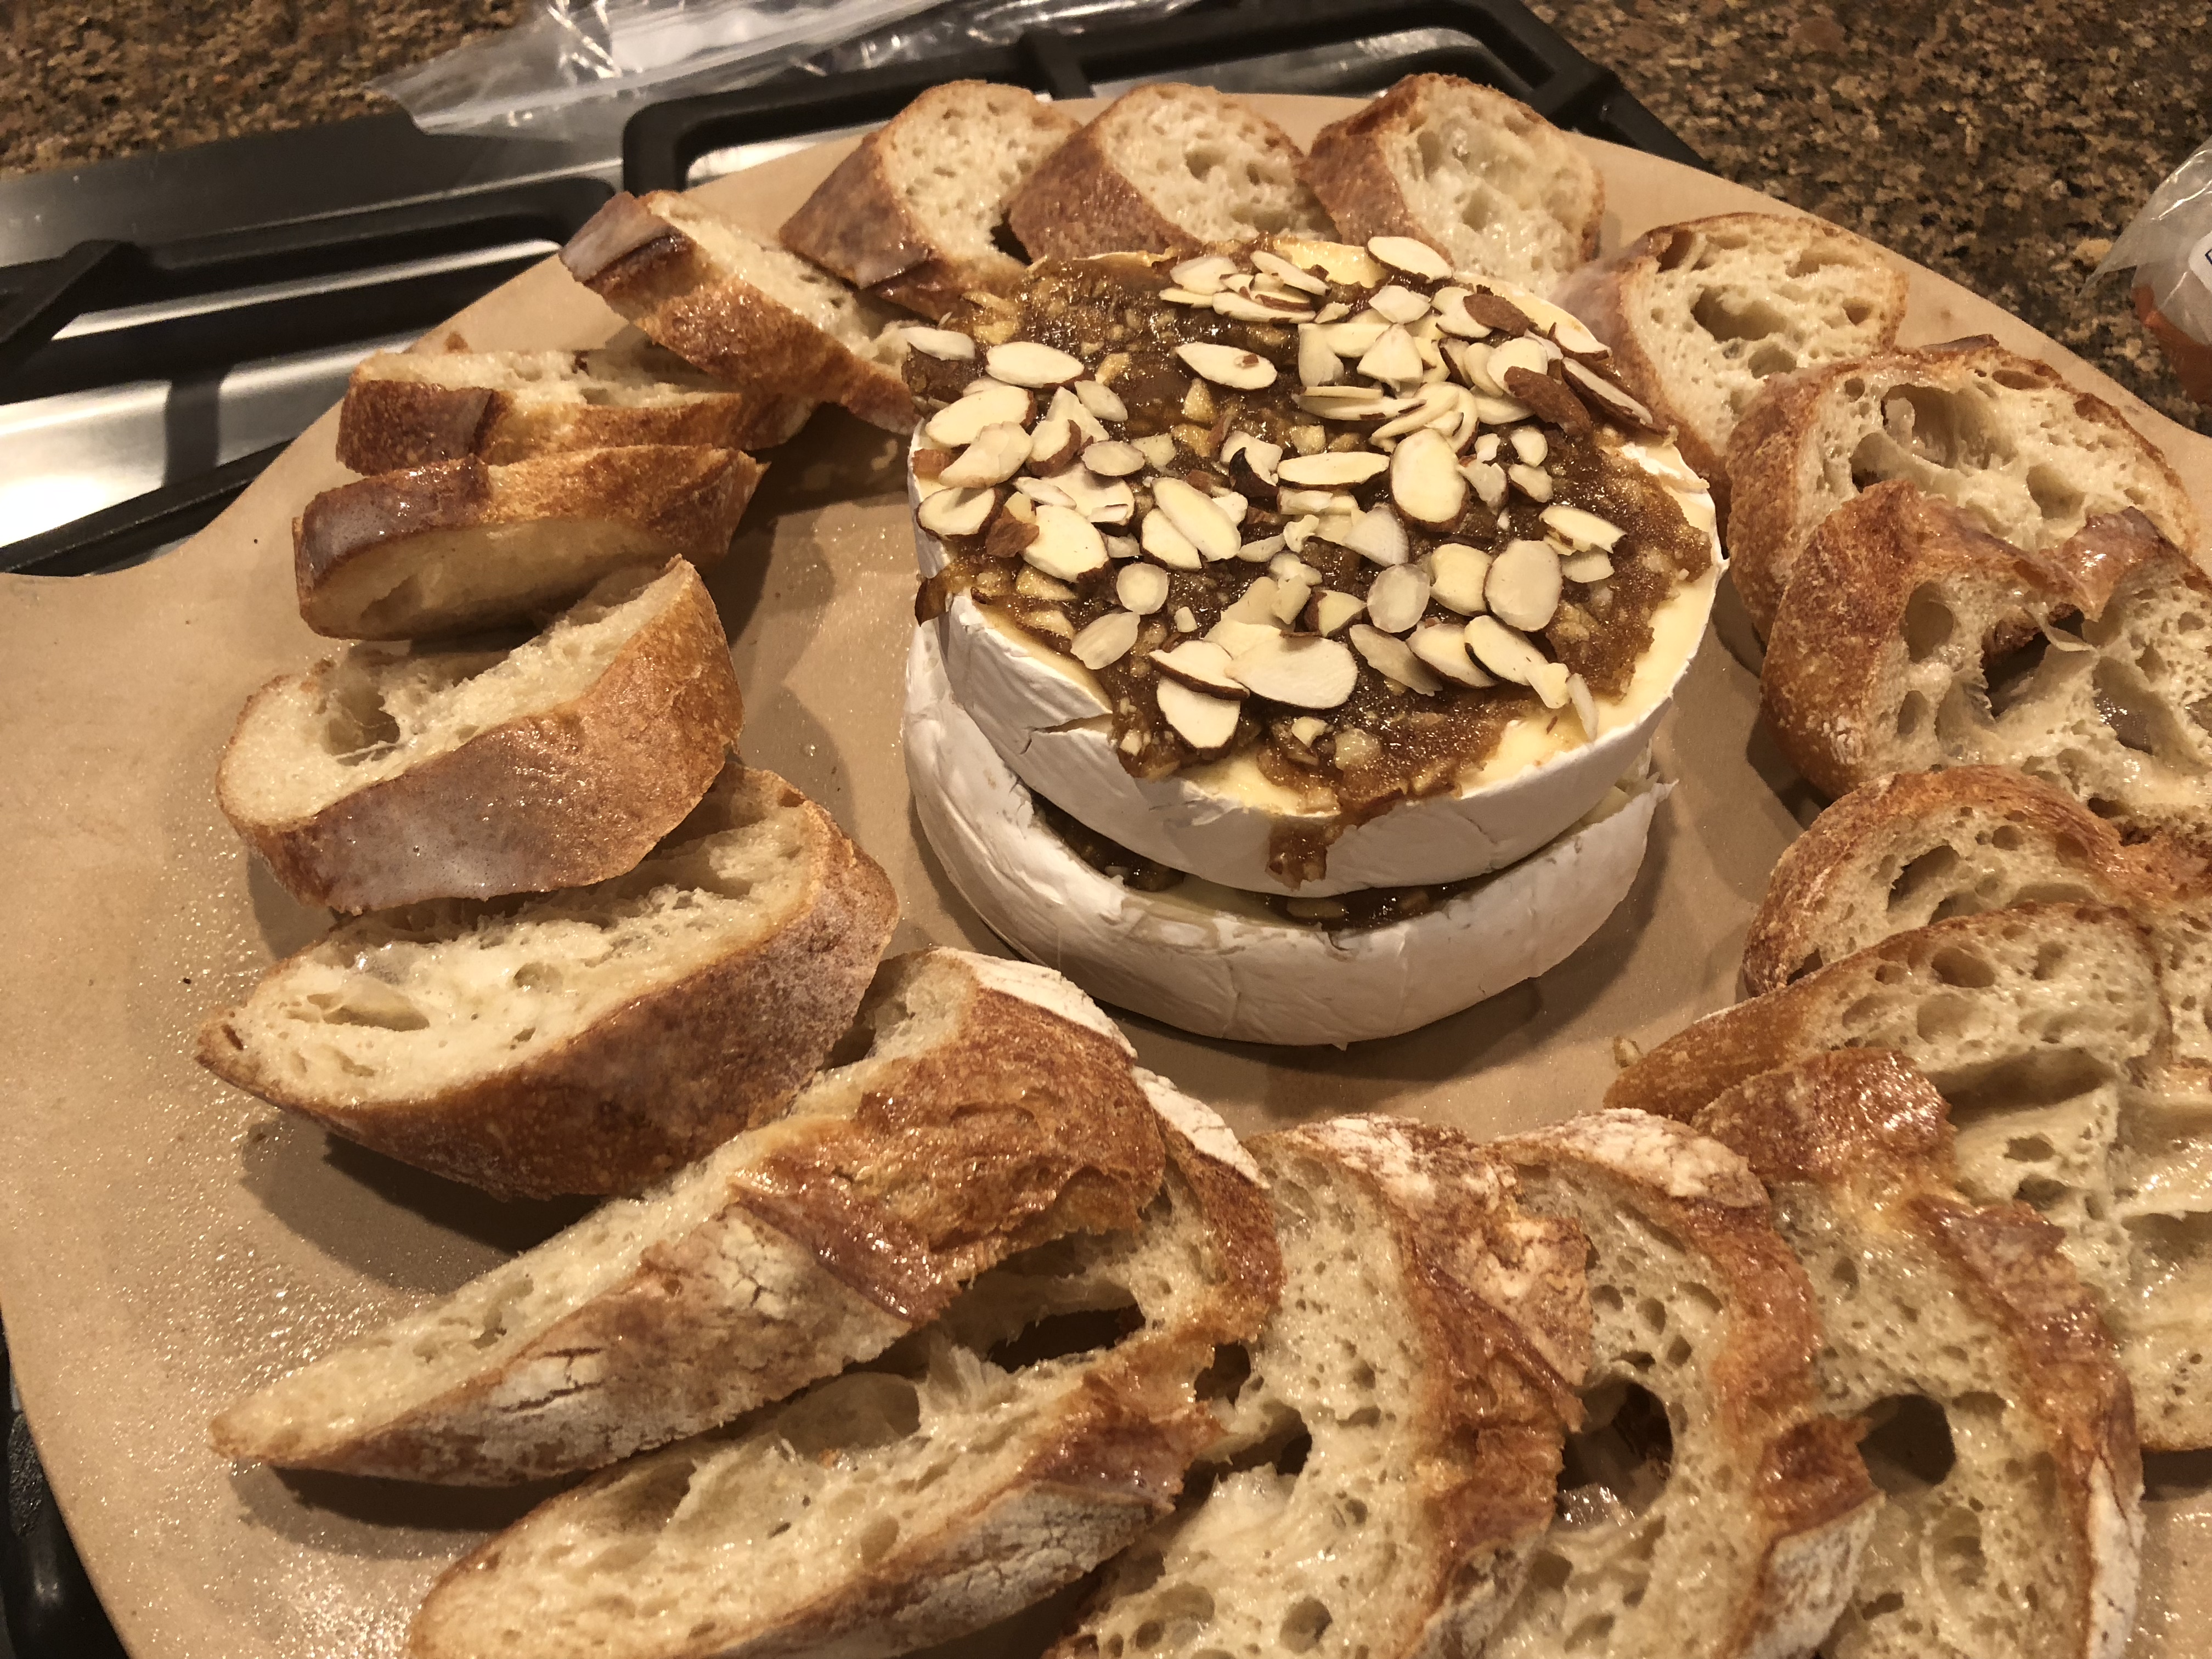 Easy Baked Brie with Almonds and Brown Sugar